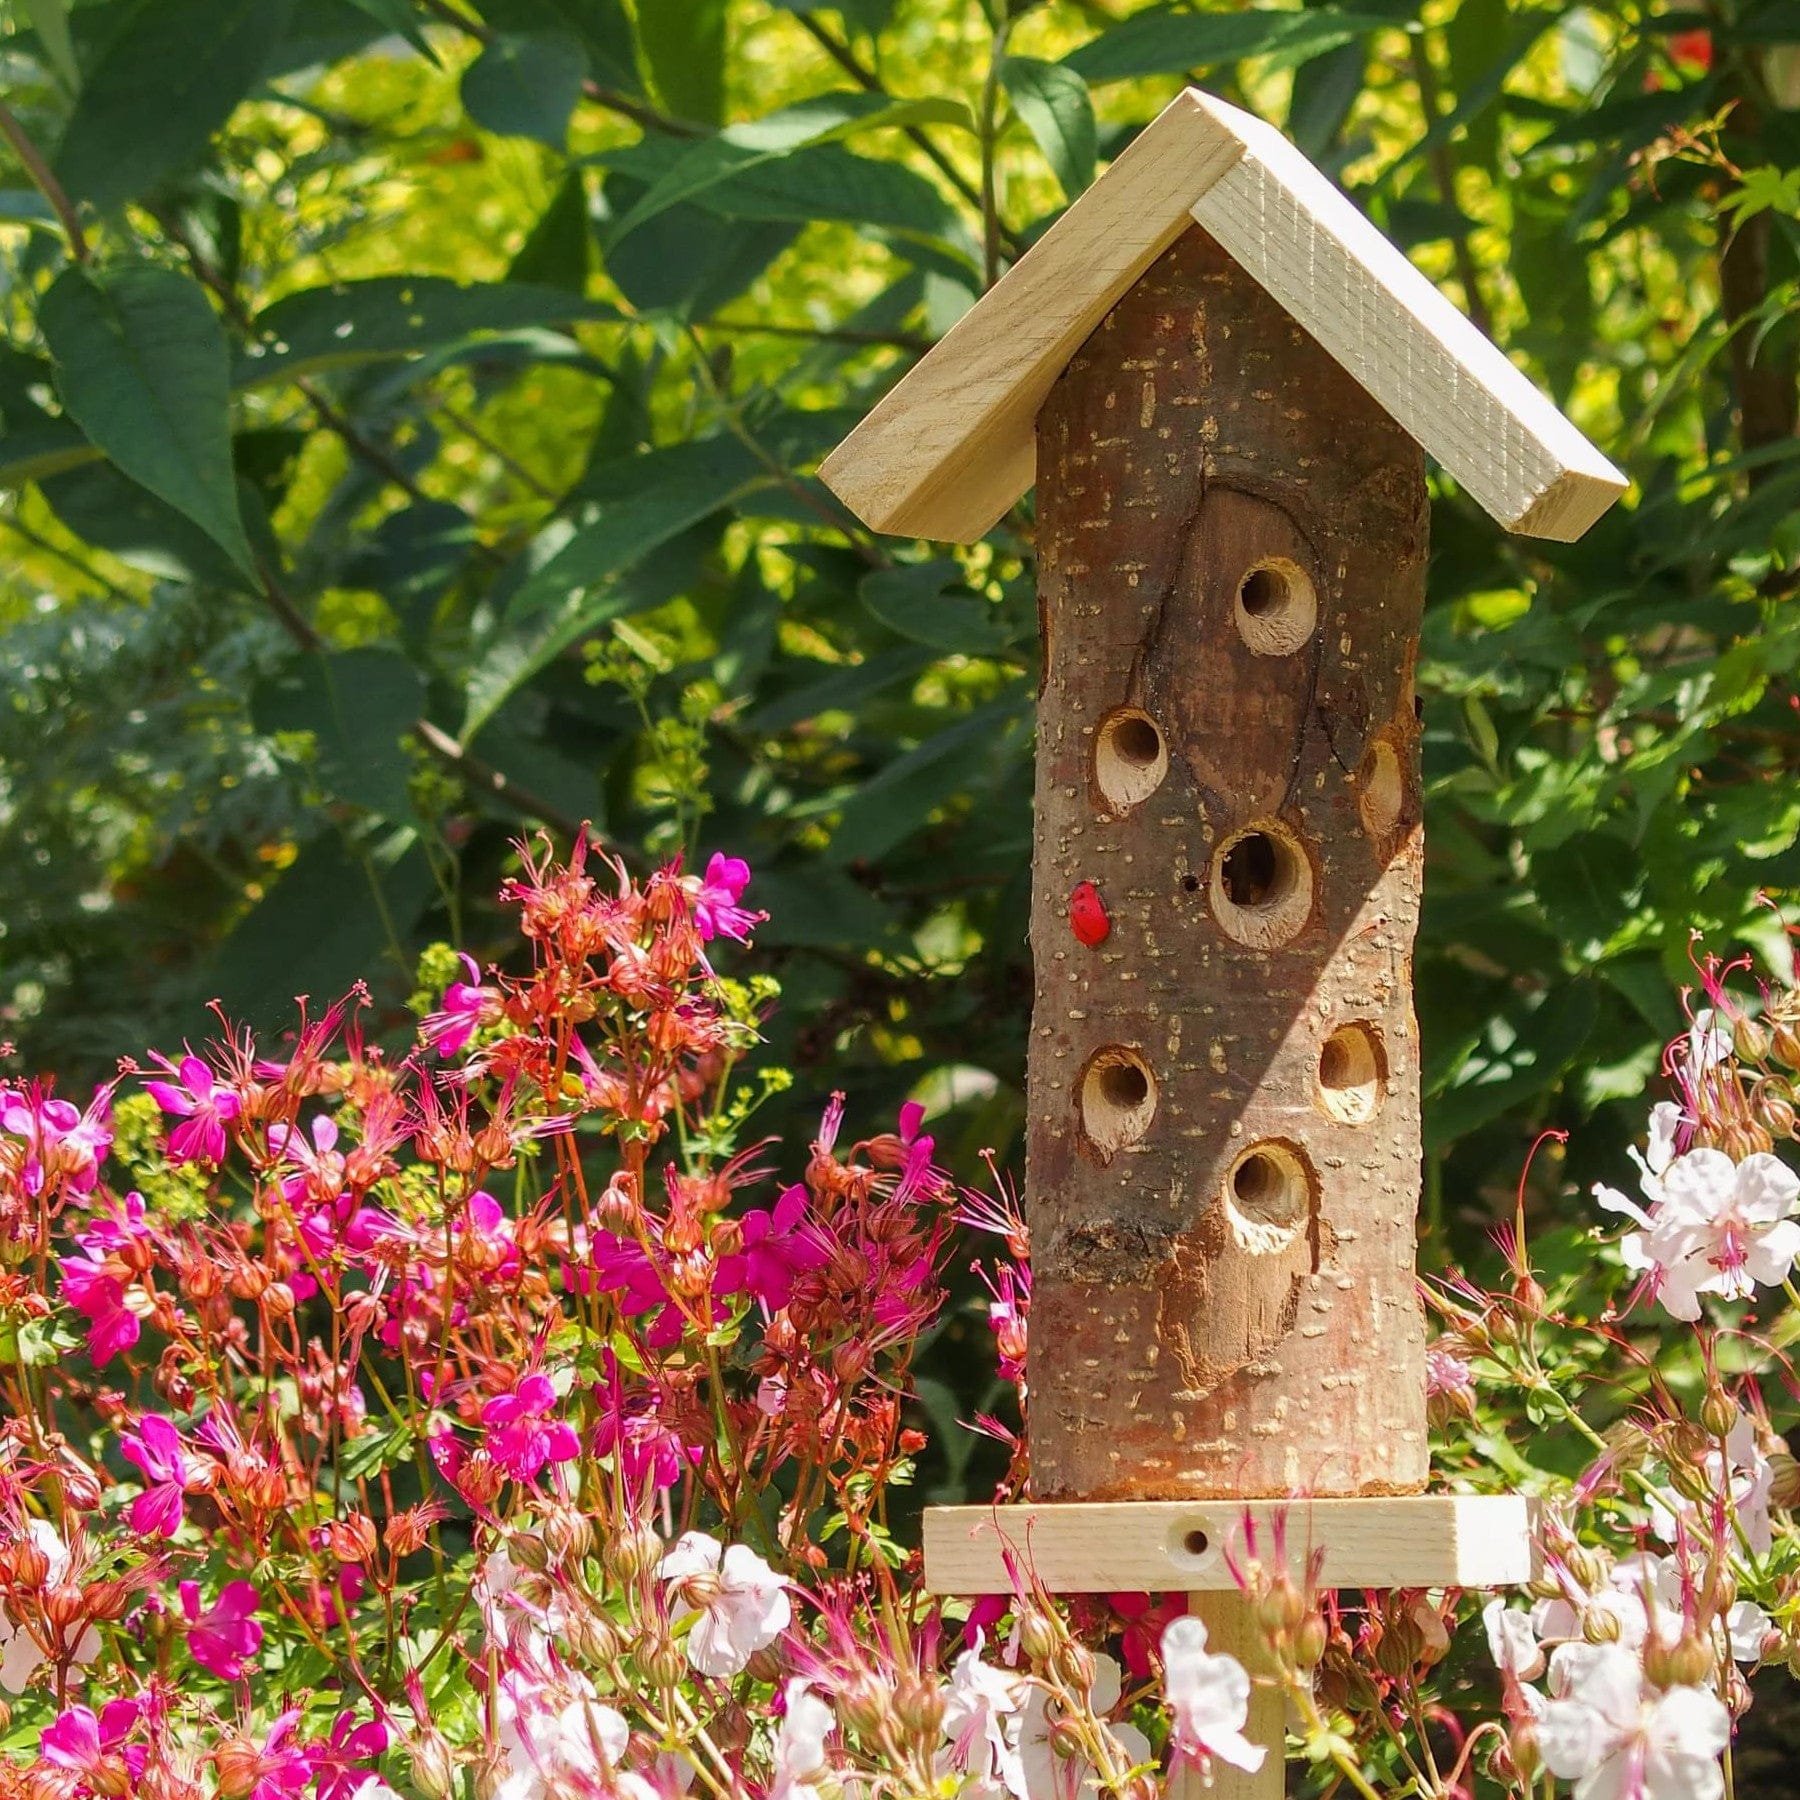 Rustic wooden birdhouse with multiple entrance holes surrounded by vibrant pink and white flowers in a lush garden setting